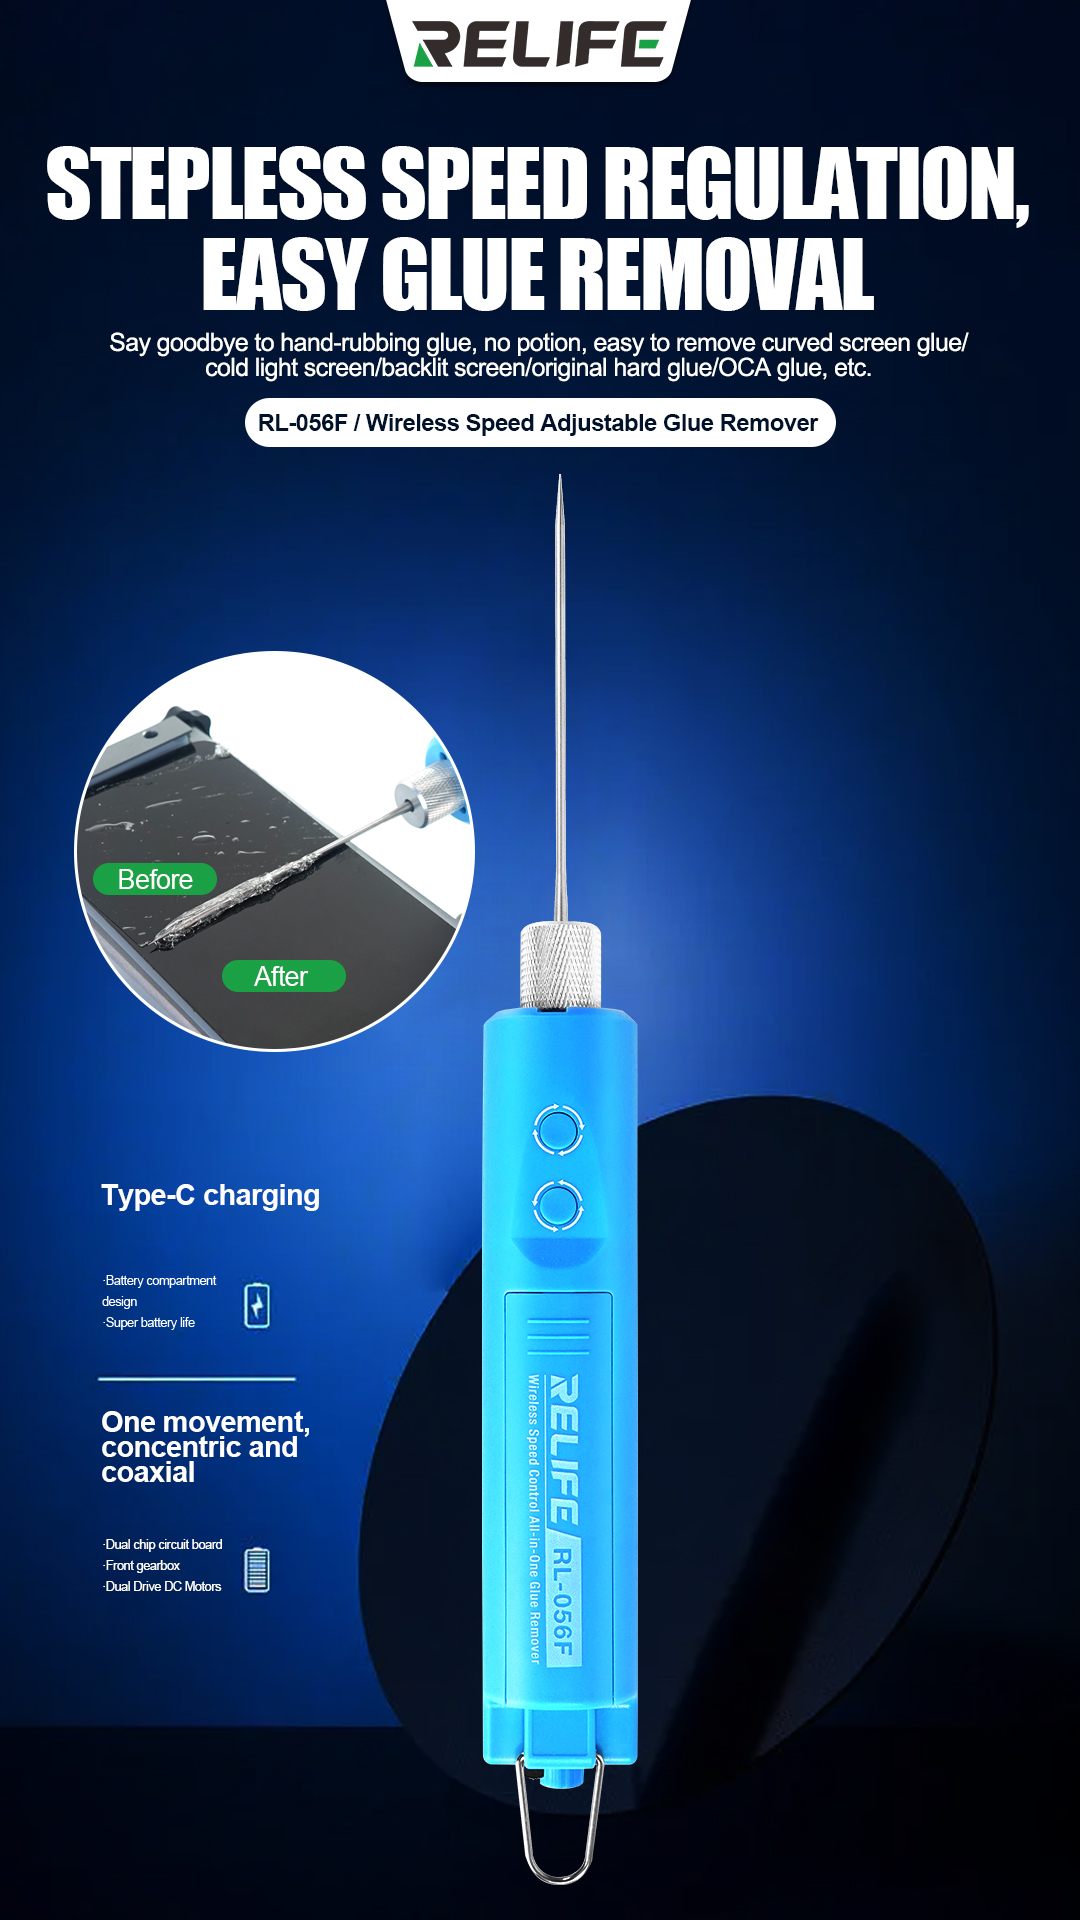 RELIFE RL-056F WIRELESS SPEED CONTROL INTEGRATED GLUE REMOVER